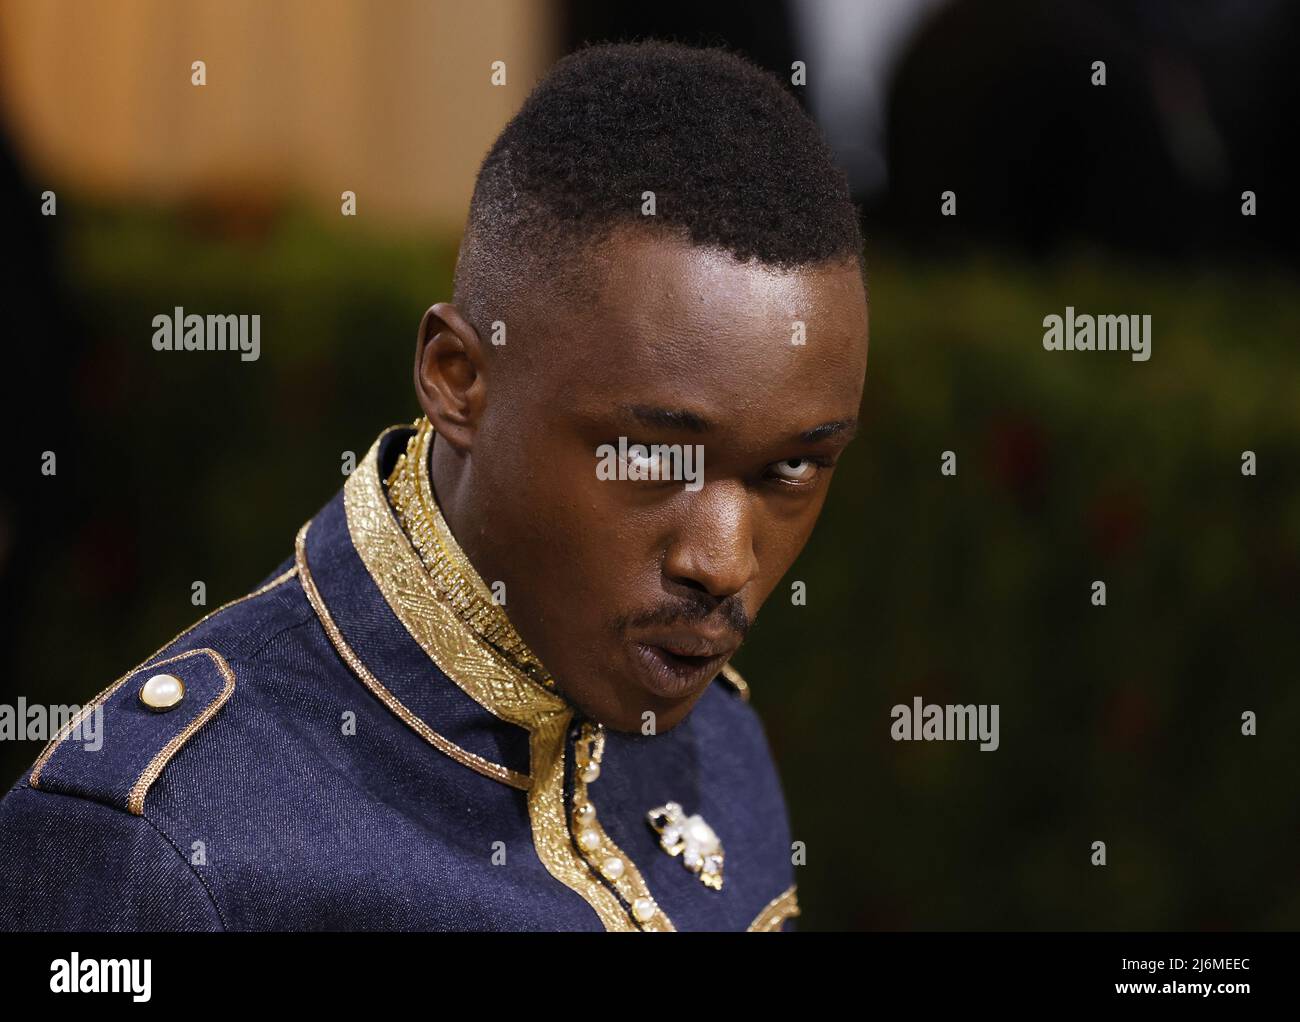 New York, United States. 03rd May, 2022. Ashton Sanders arrives on the red carpet for The Met Gala at The Metropolitan Museum of Art celebrating the Costume Institute opening of 'In America: An Anthology of Fashion' in New York City on Monday, May 2, 2022. Photo by John Angelillo/UPI Credit: UPI/Alamy Live News Stock Photo